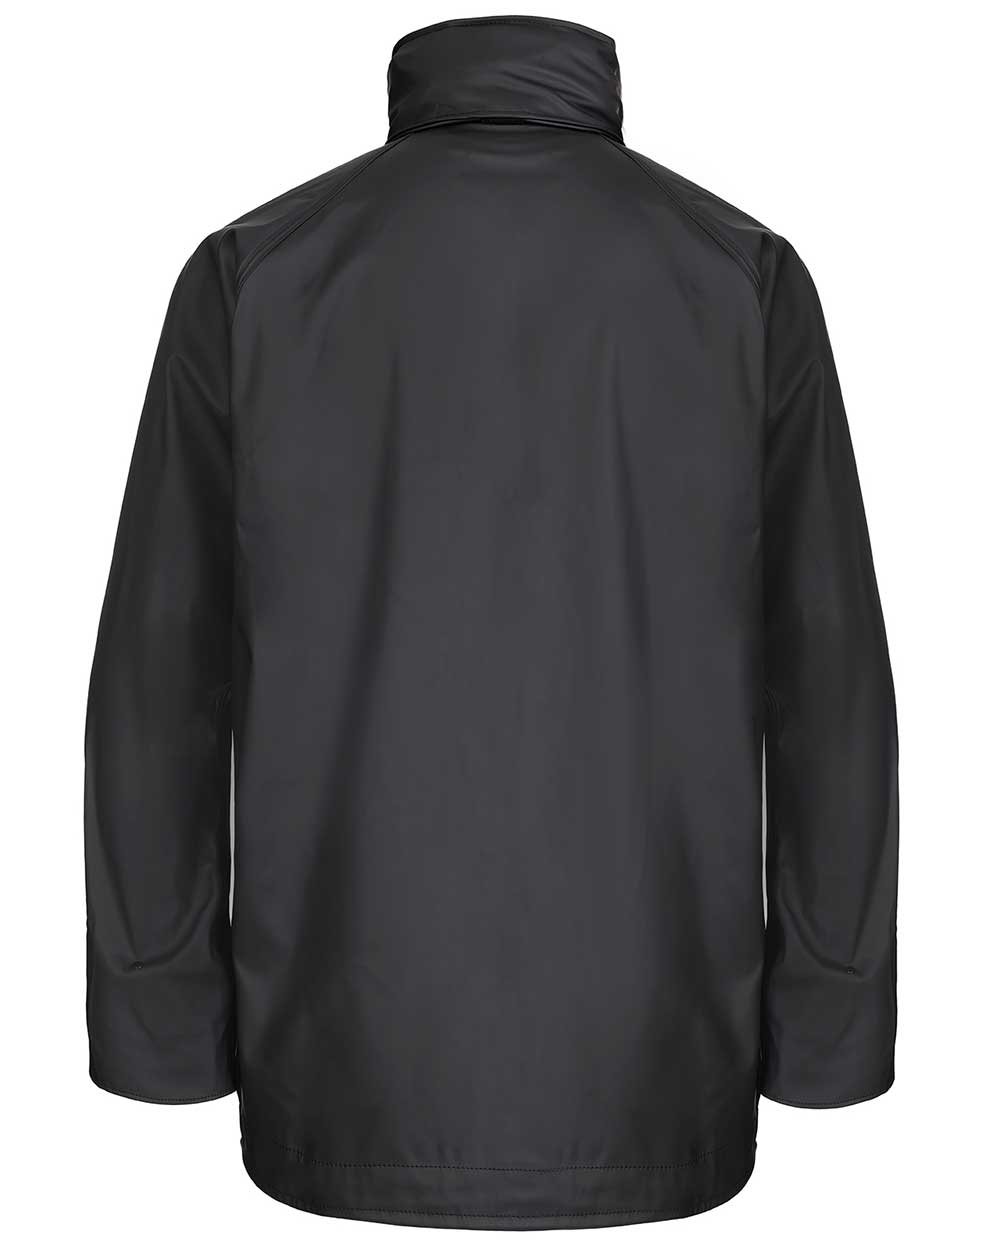 Black coloured Fort Airflex Fortex Breathable Waterproof Jacket on white background 